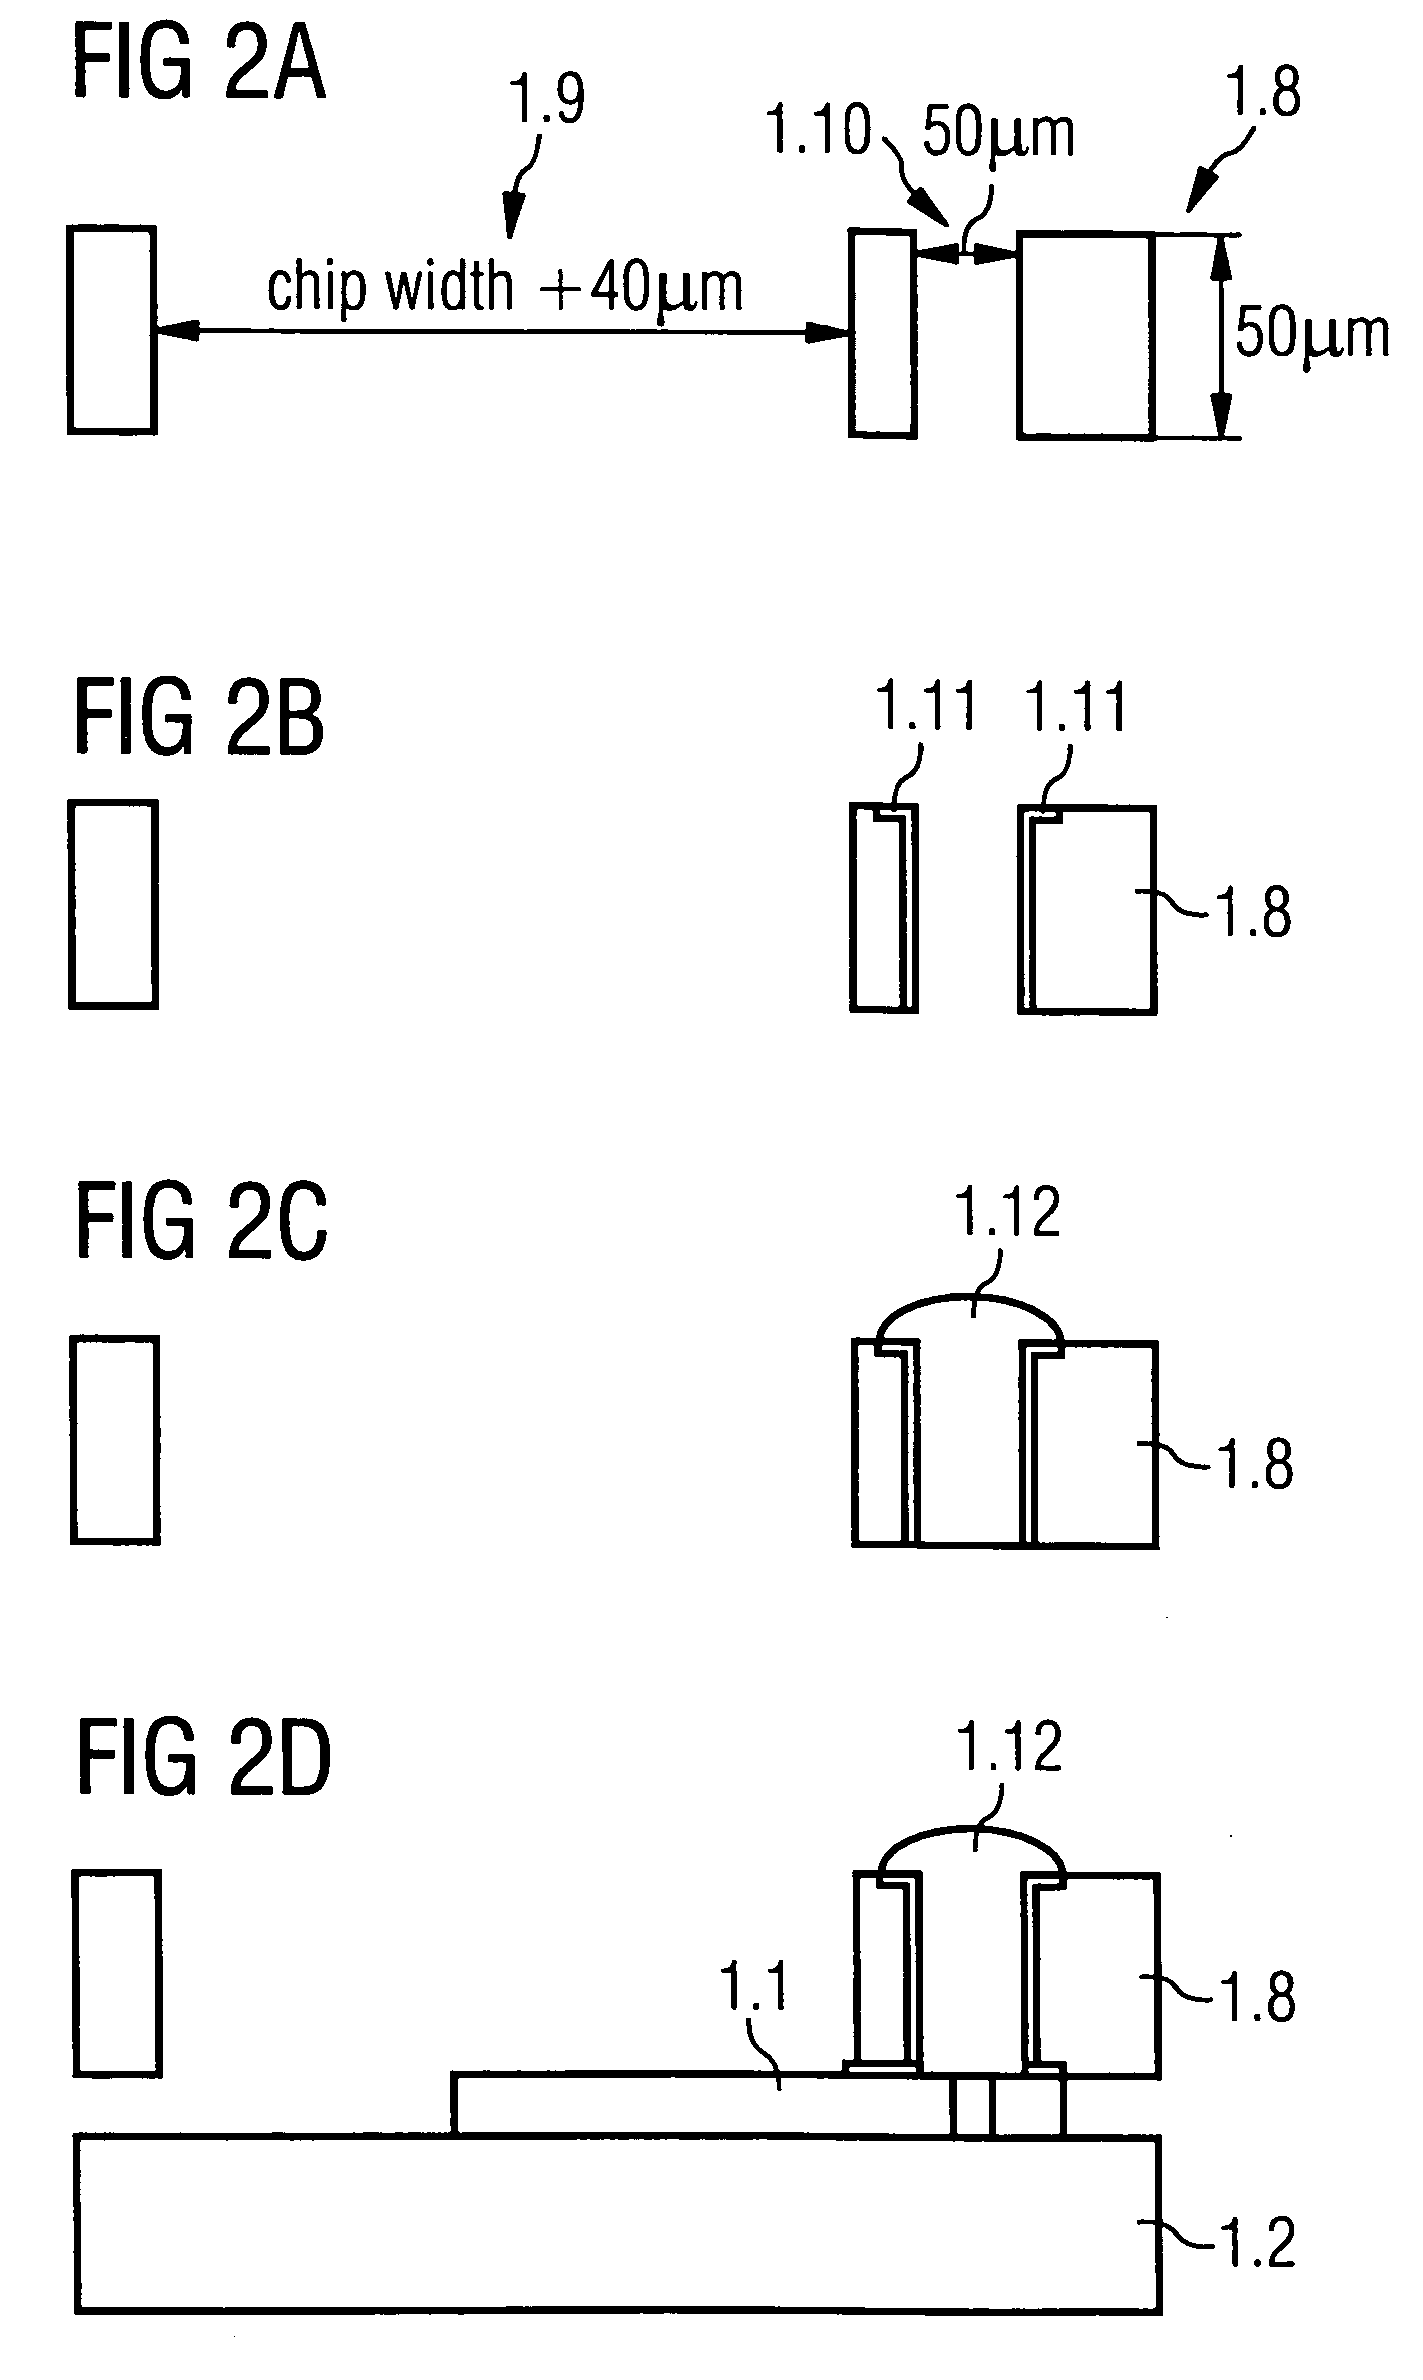 Dissociated fabrication of packages and chips of integrated circuits